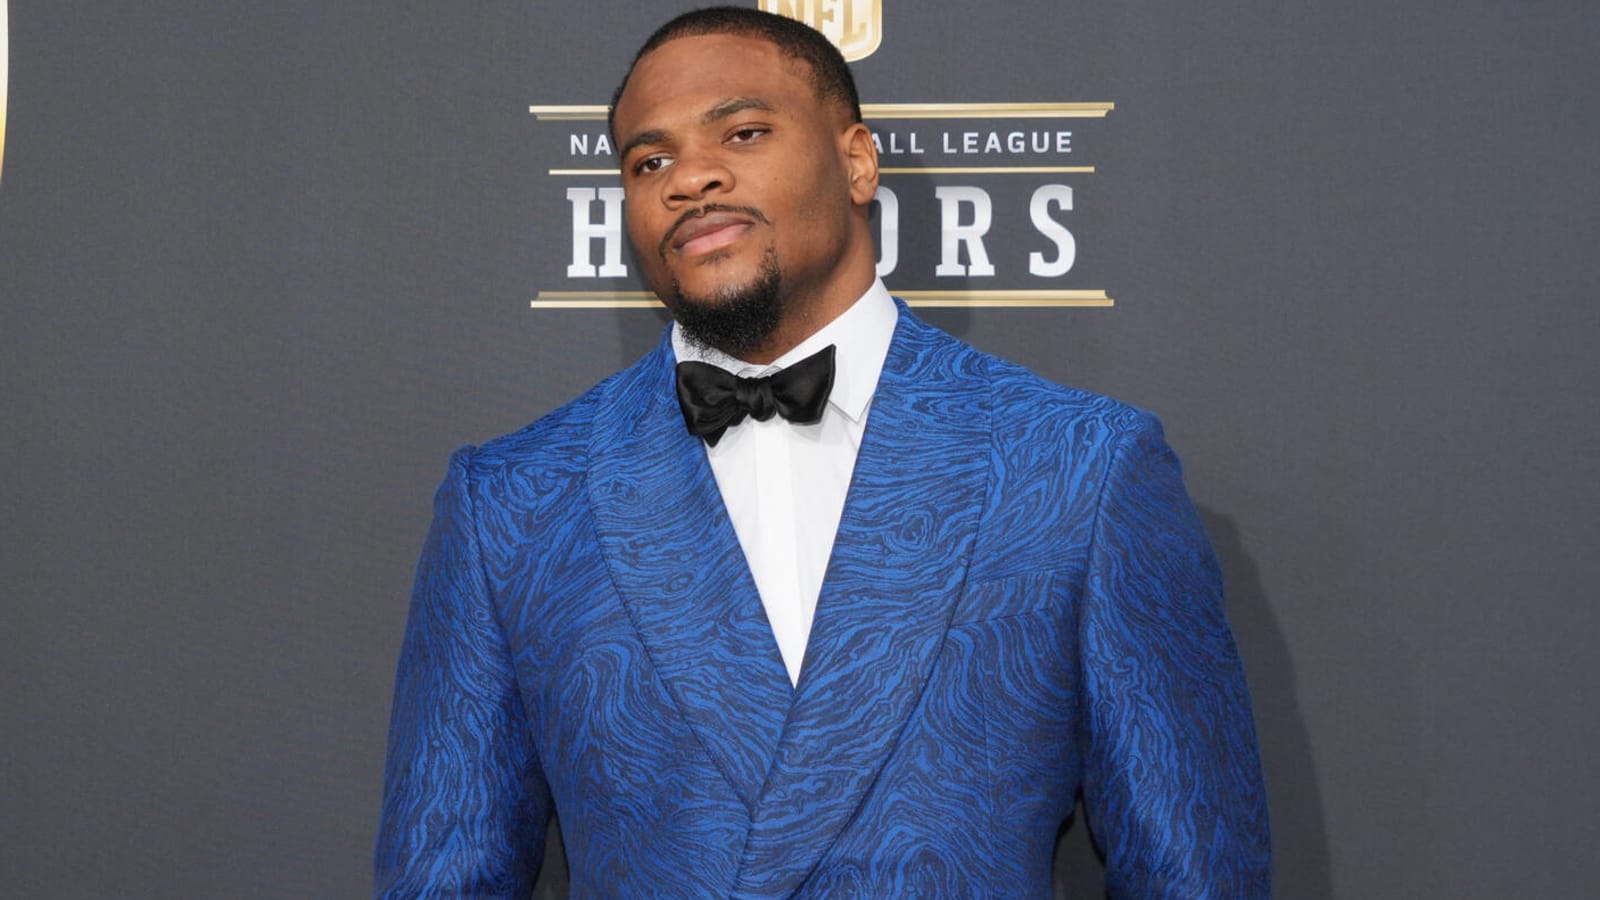 Bart Scott: Parsons 'needs to go to a leadership school'